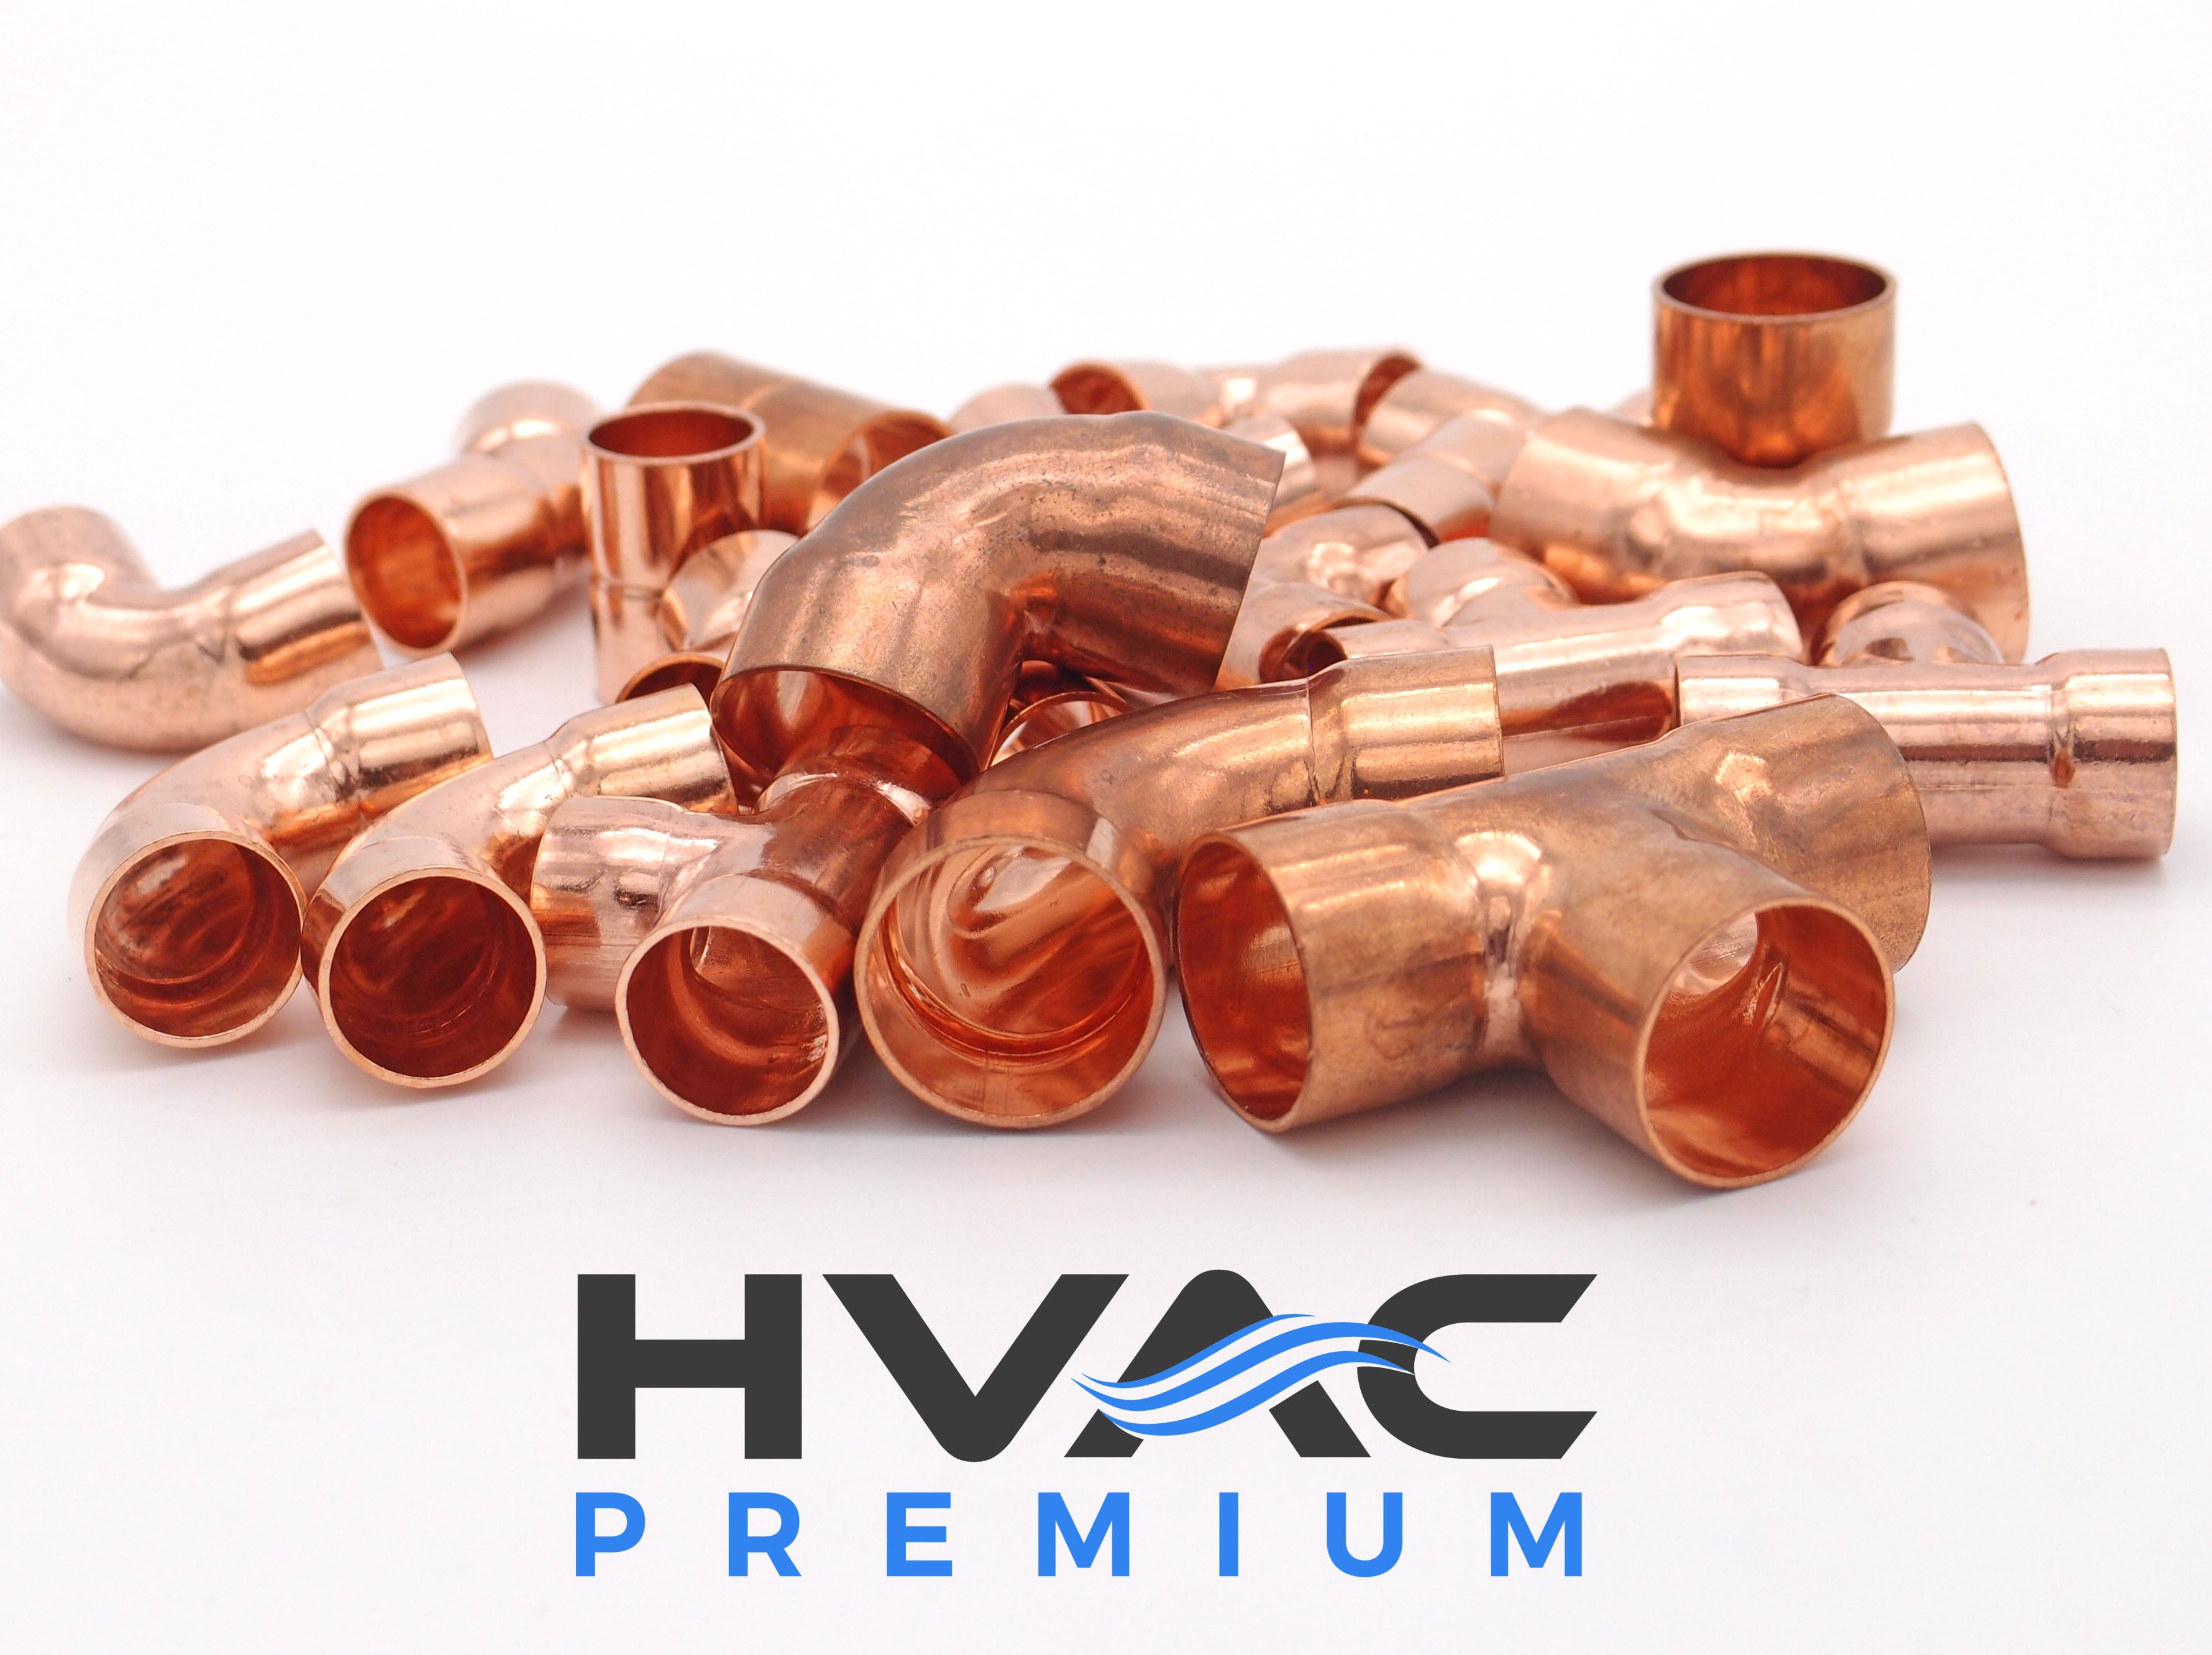 Copper Fitting 7/8 Inch (HVAC Outer Dimension) 3/4 Inch (Plumbing Inner Dimension) - Copper 90 Degree Elbow Fitting Connector - 99.9% Pure Copper - 10 Pack